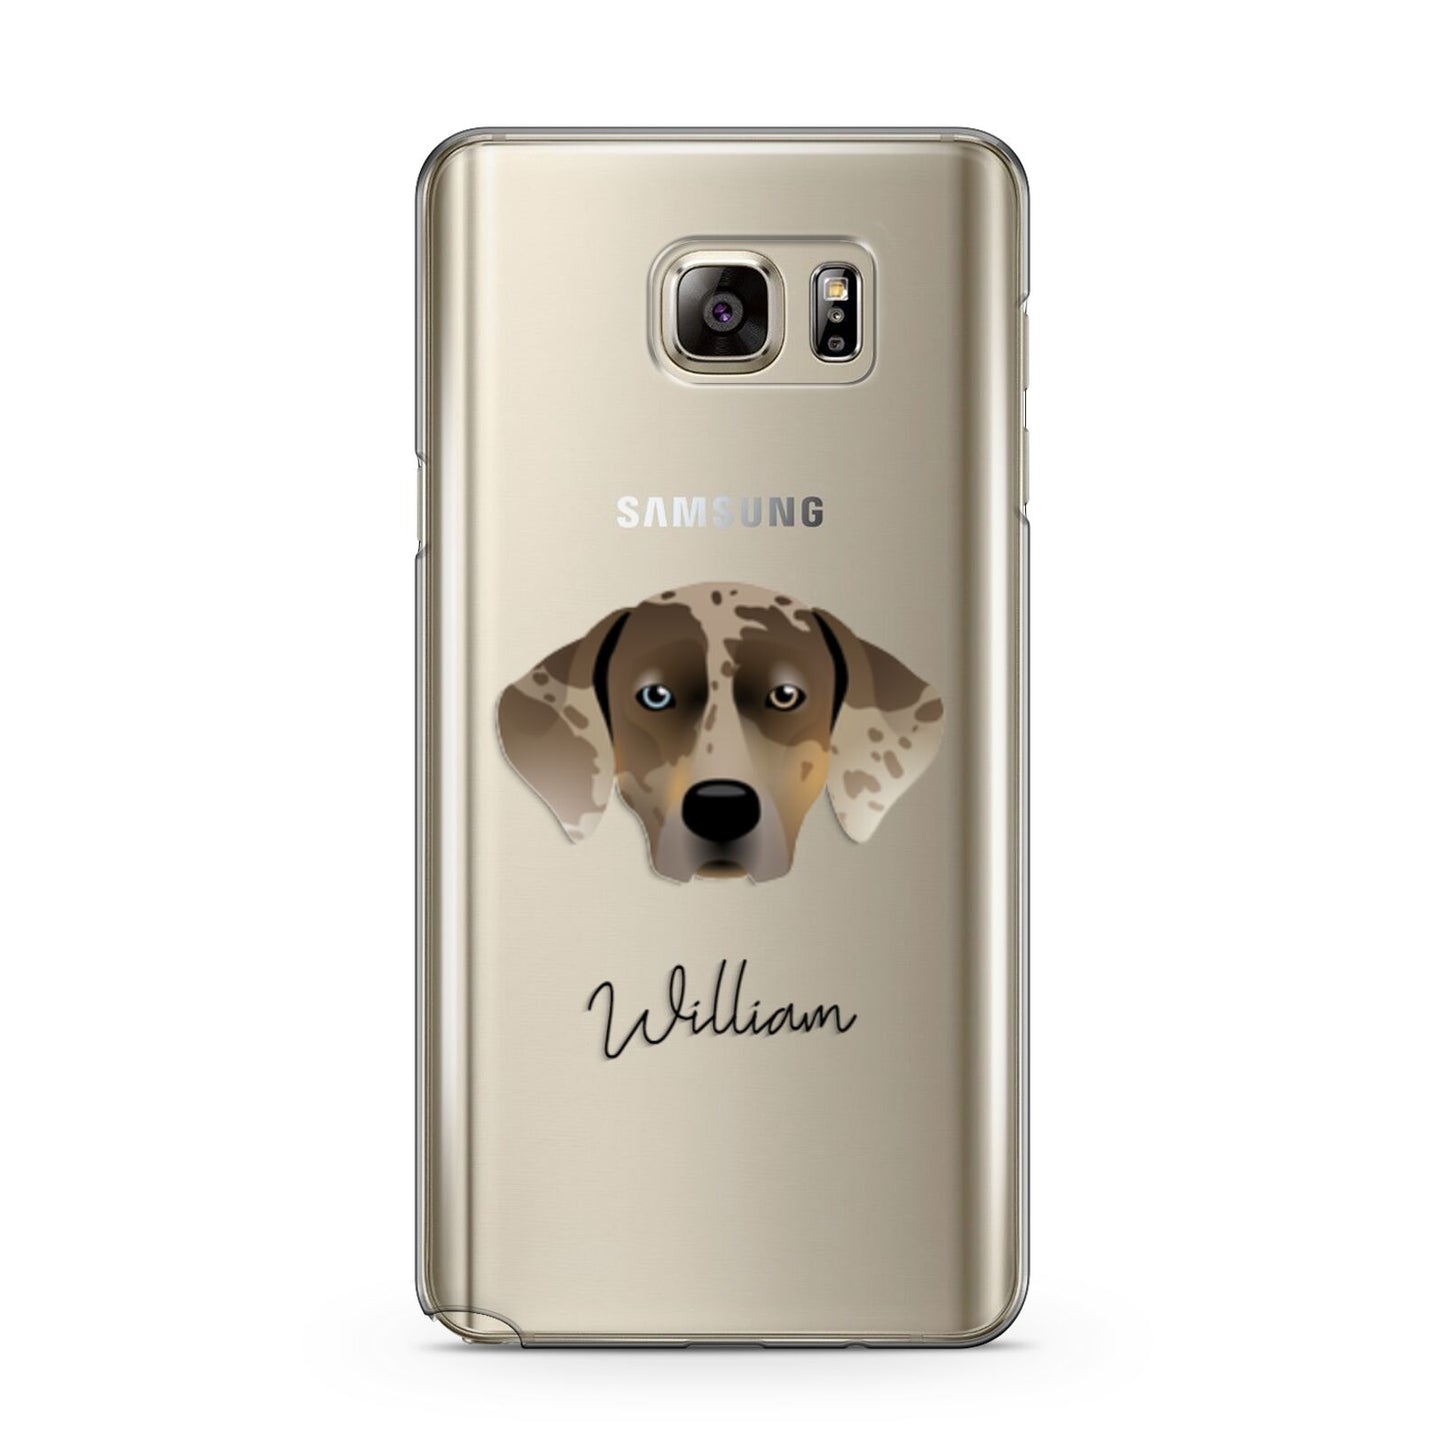 Catahoula Leopard Dog Personalised Samsung Galaxy Note 5 Case